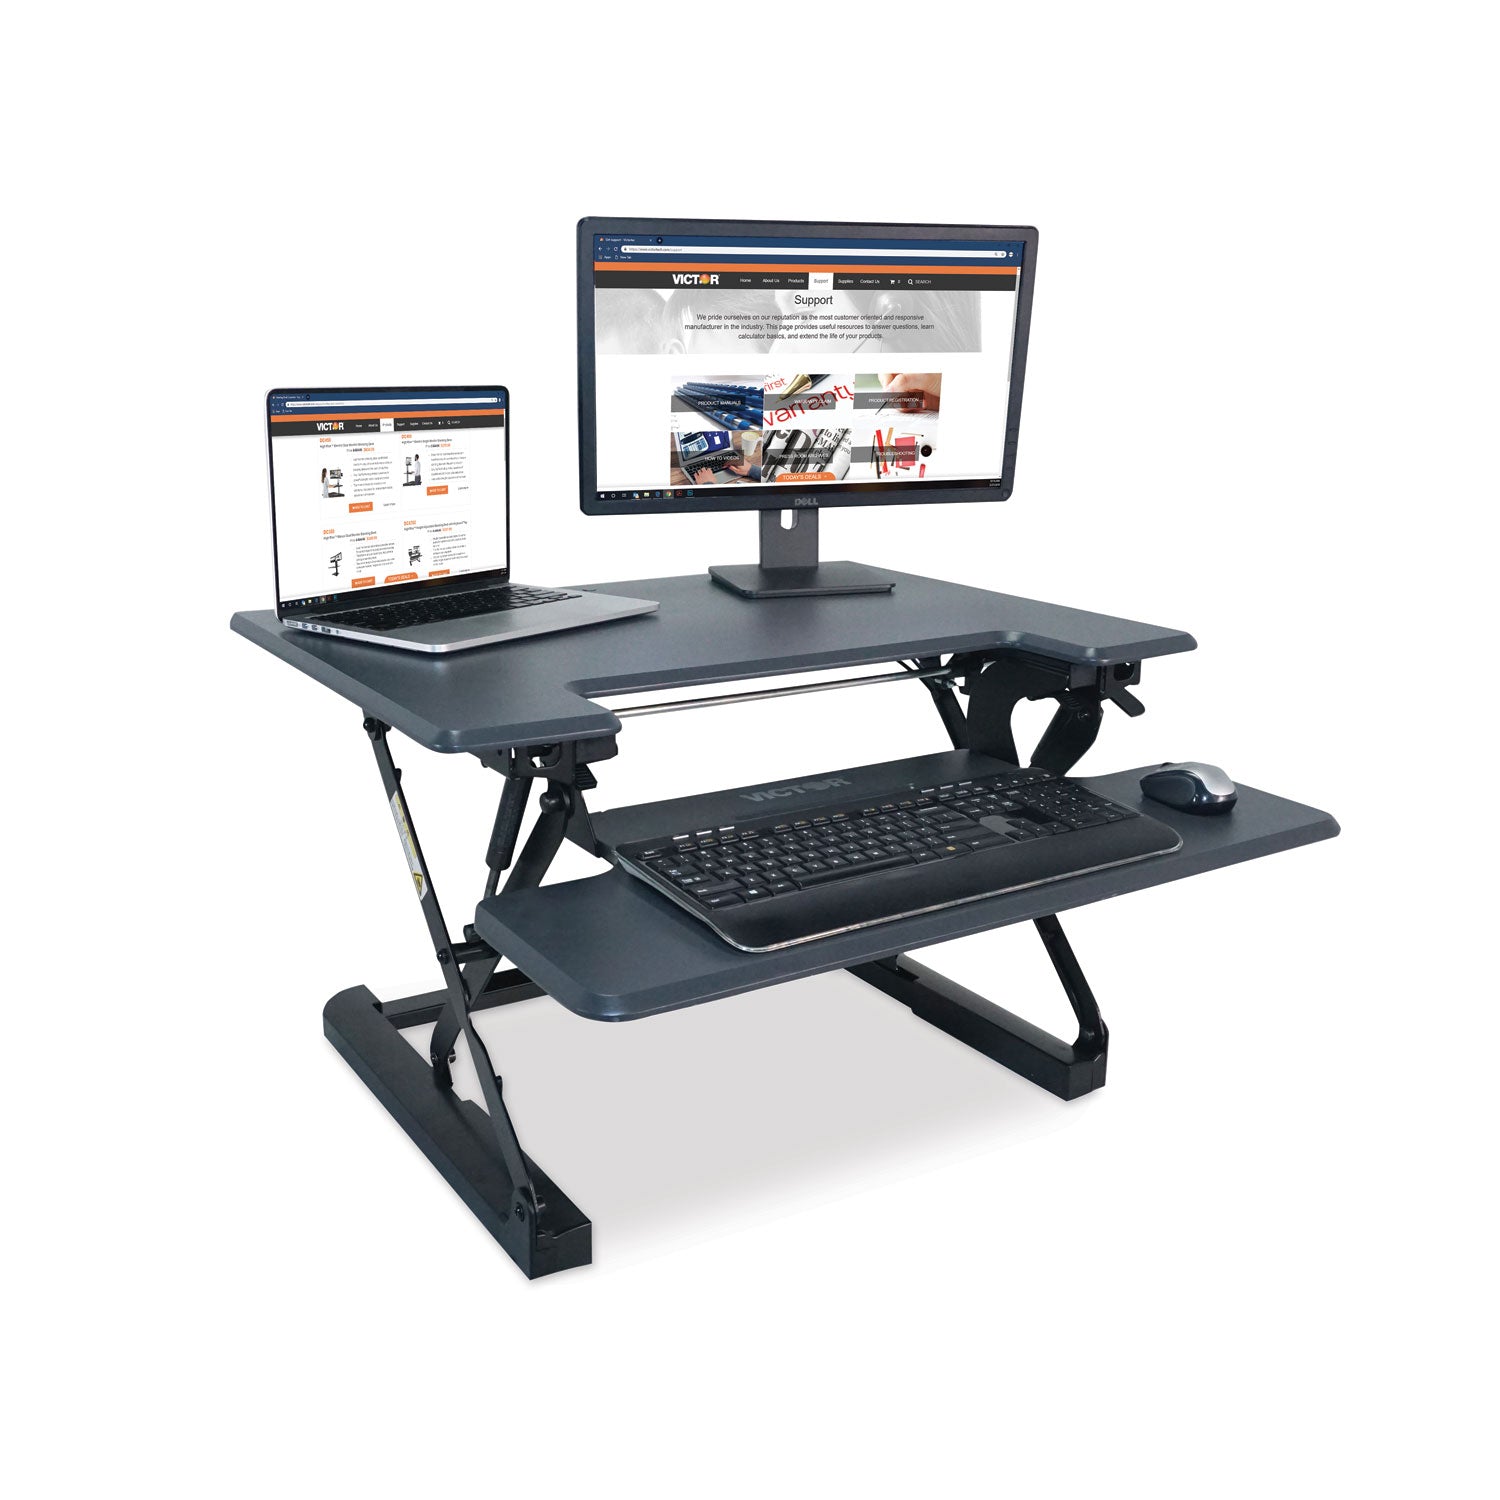 high-rise-height-adjustable-standing-desk-with-keyboard-tray-31-x-3125-x-525-to-20-gray-black_vctdcx710g - 2